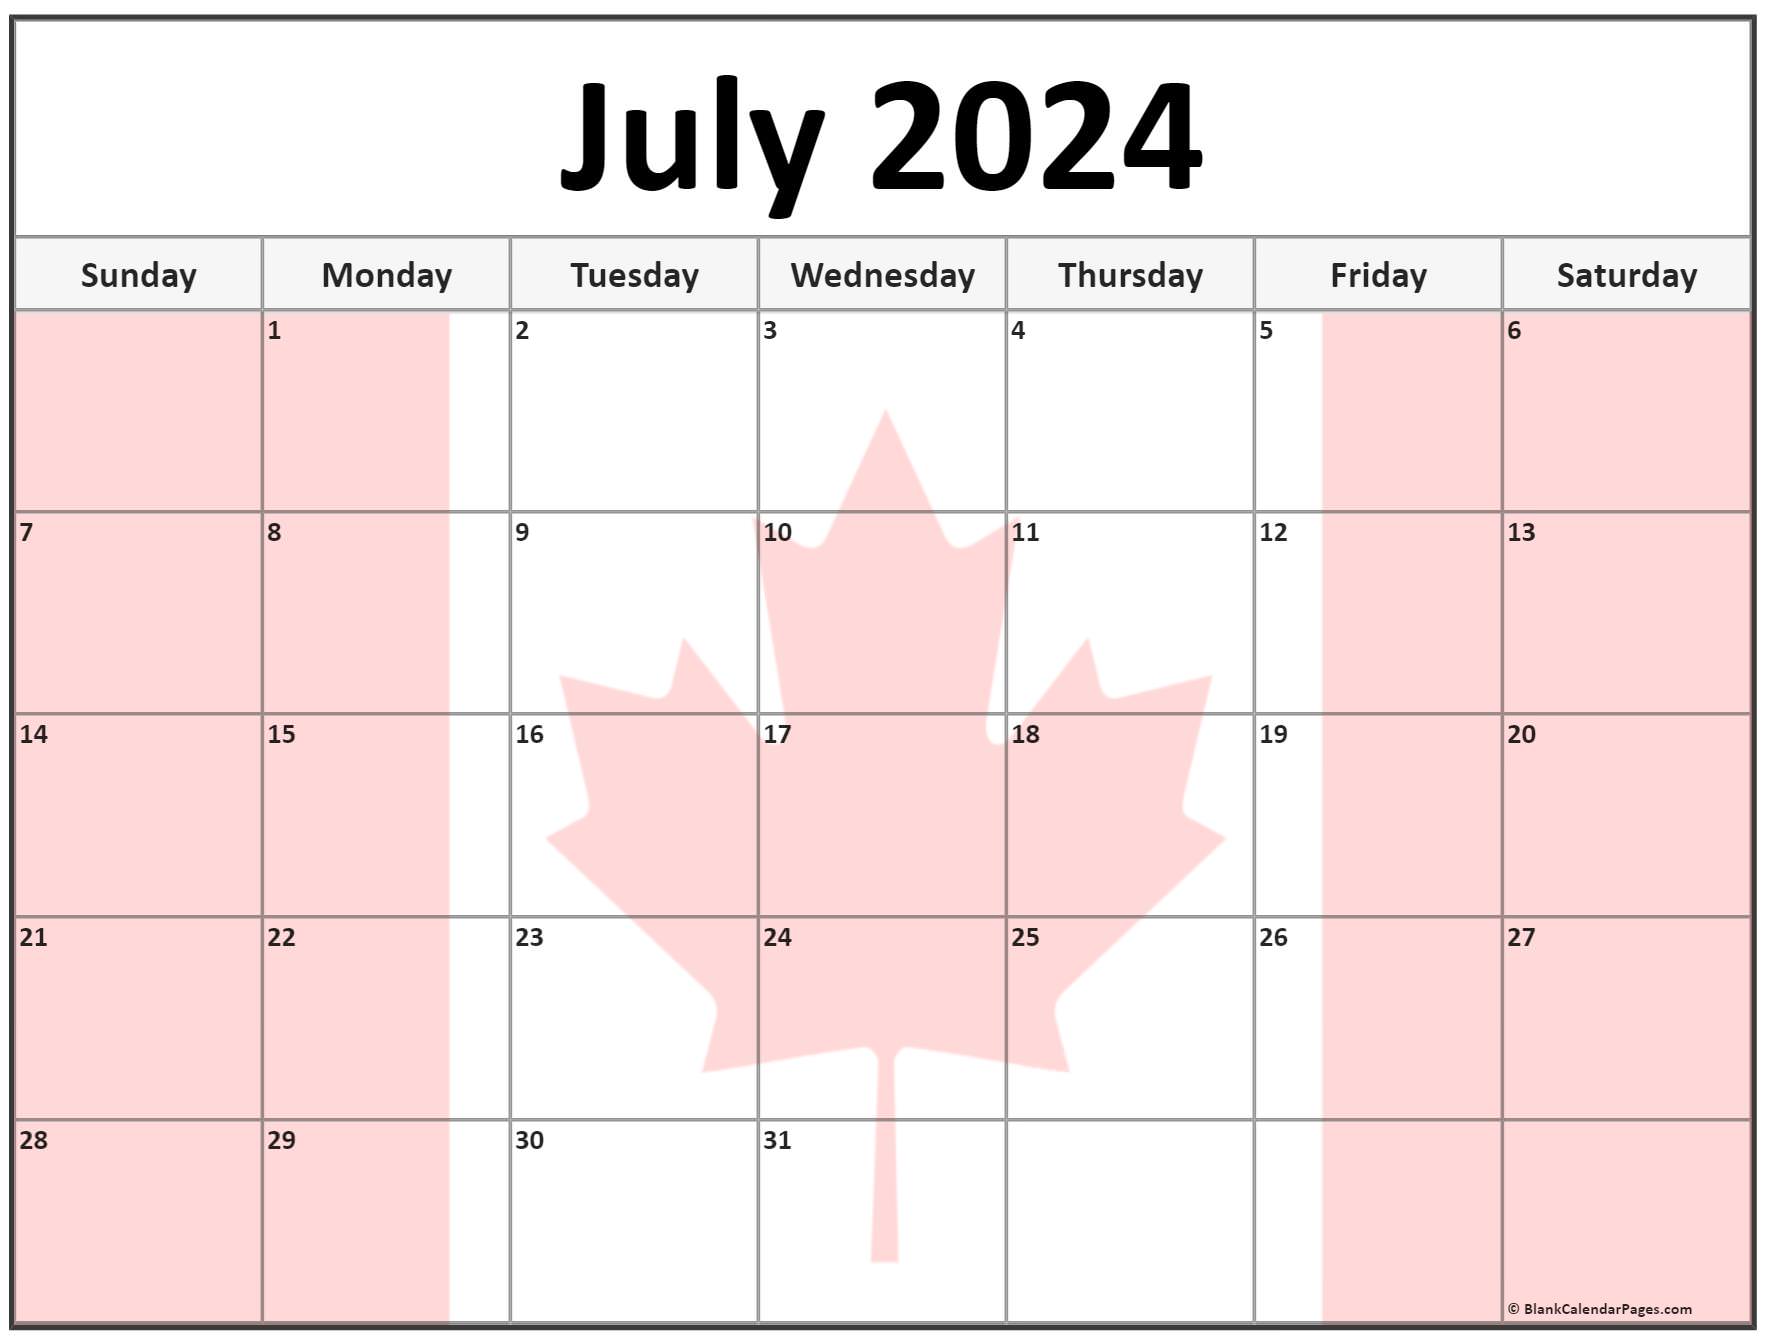 collection of july 2022 photo calendars with image filters